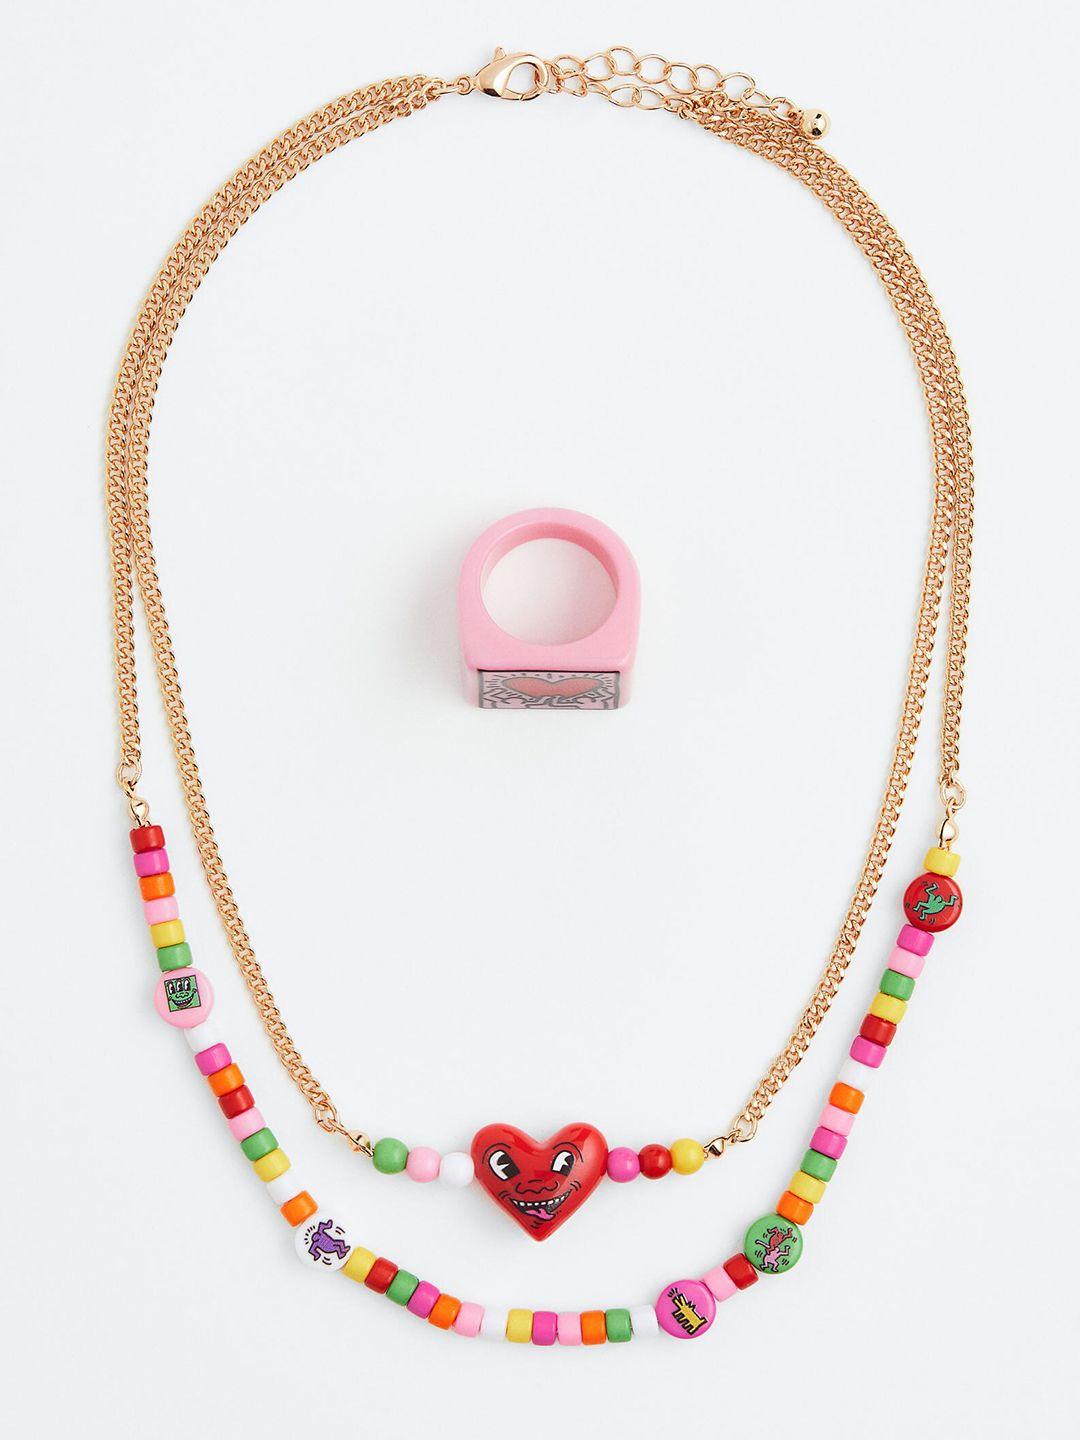 h&m beaded necklace with ring